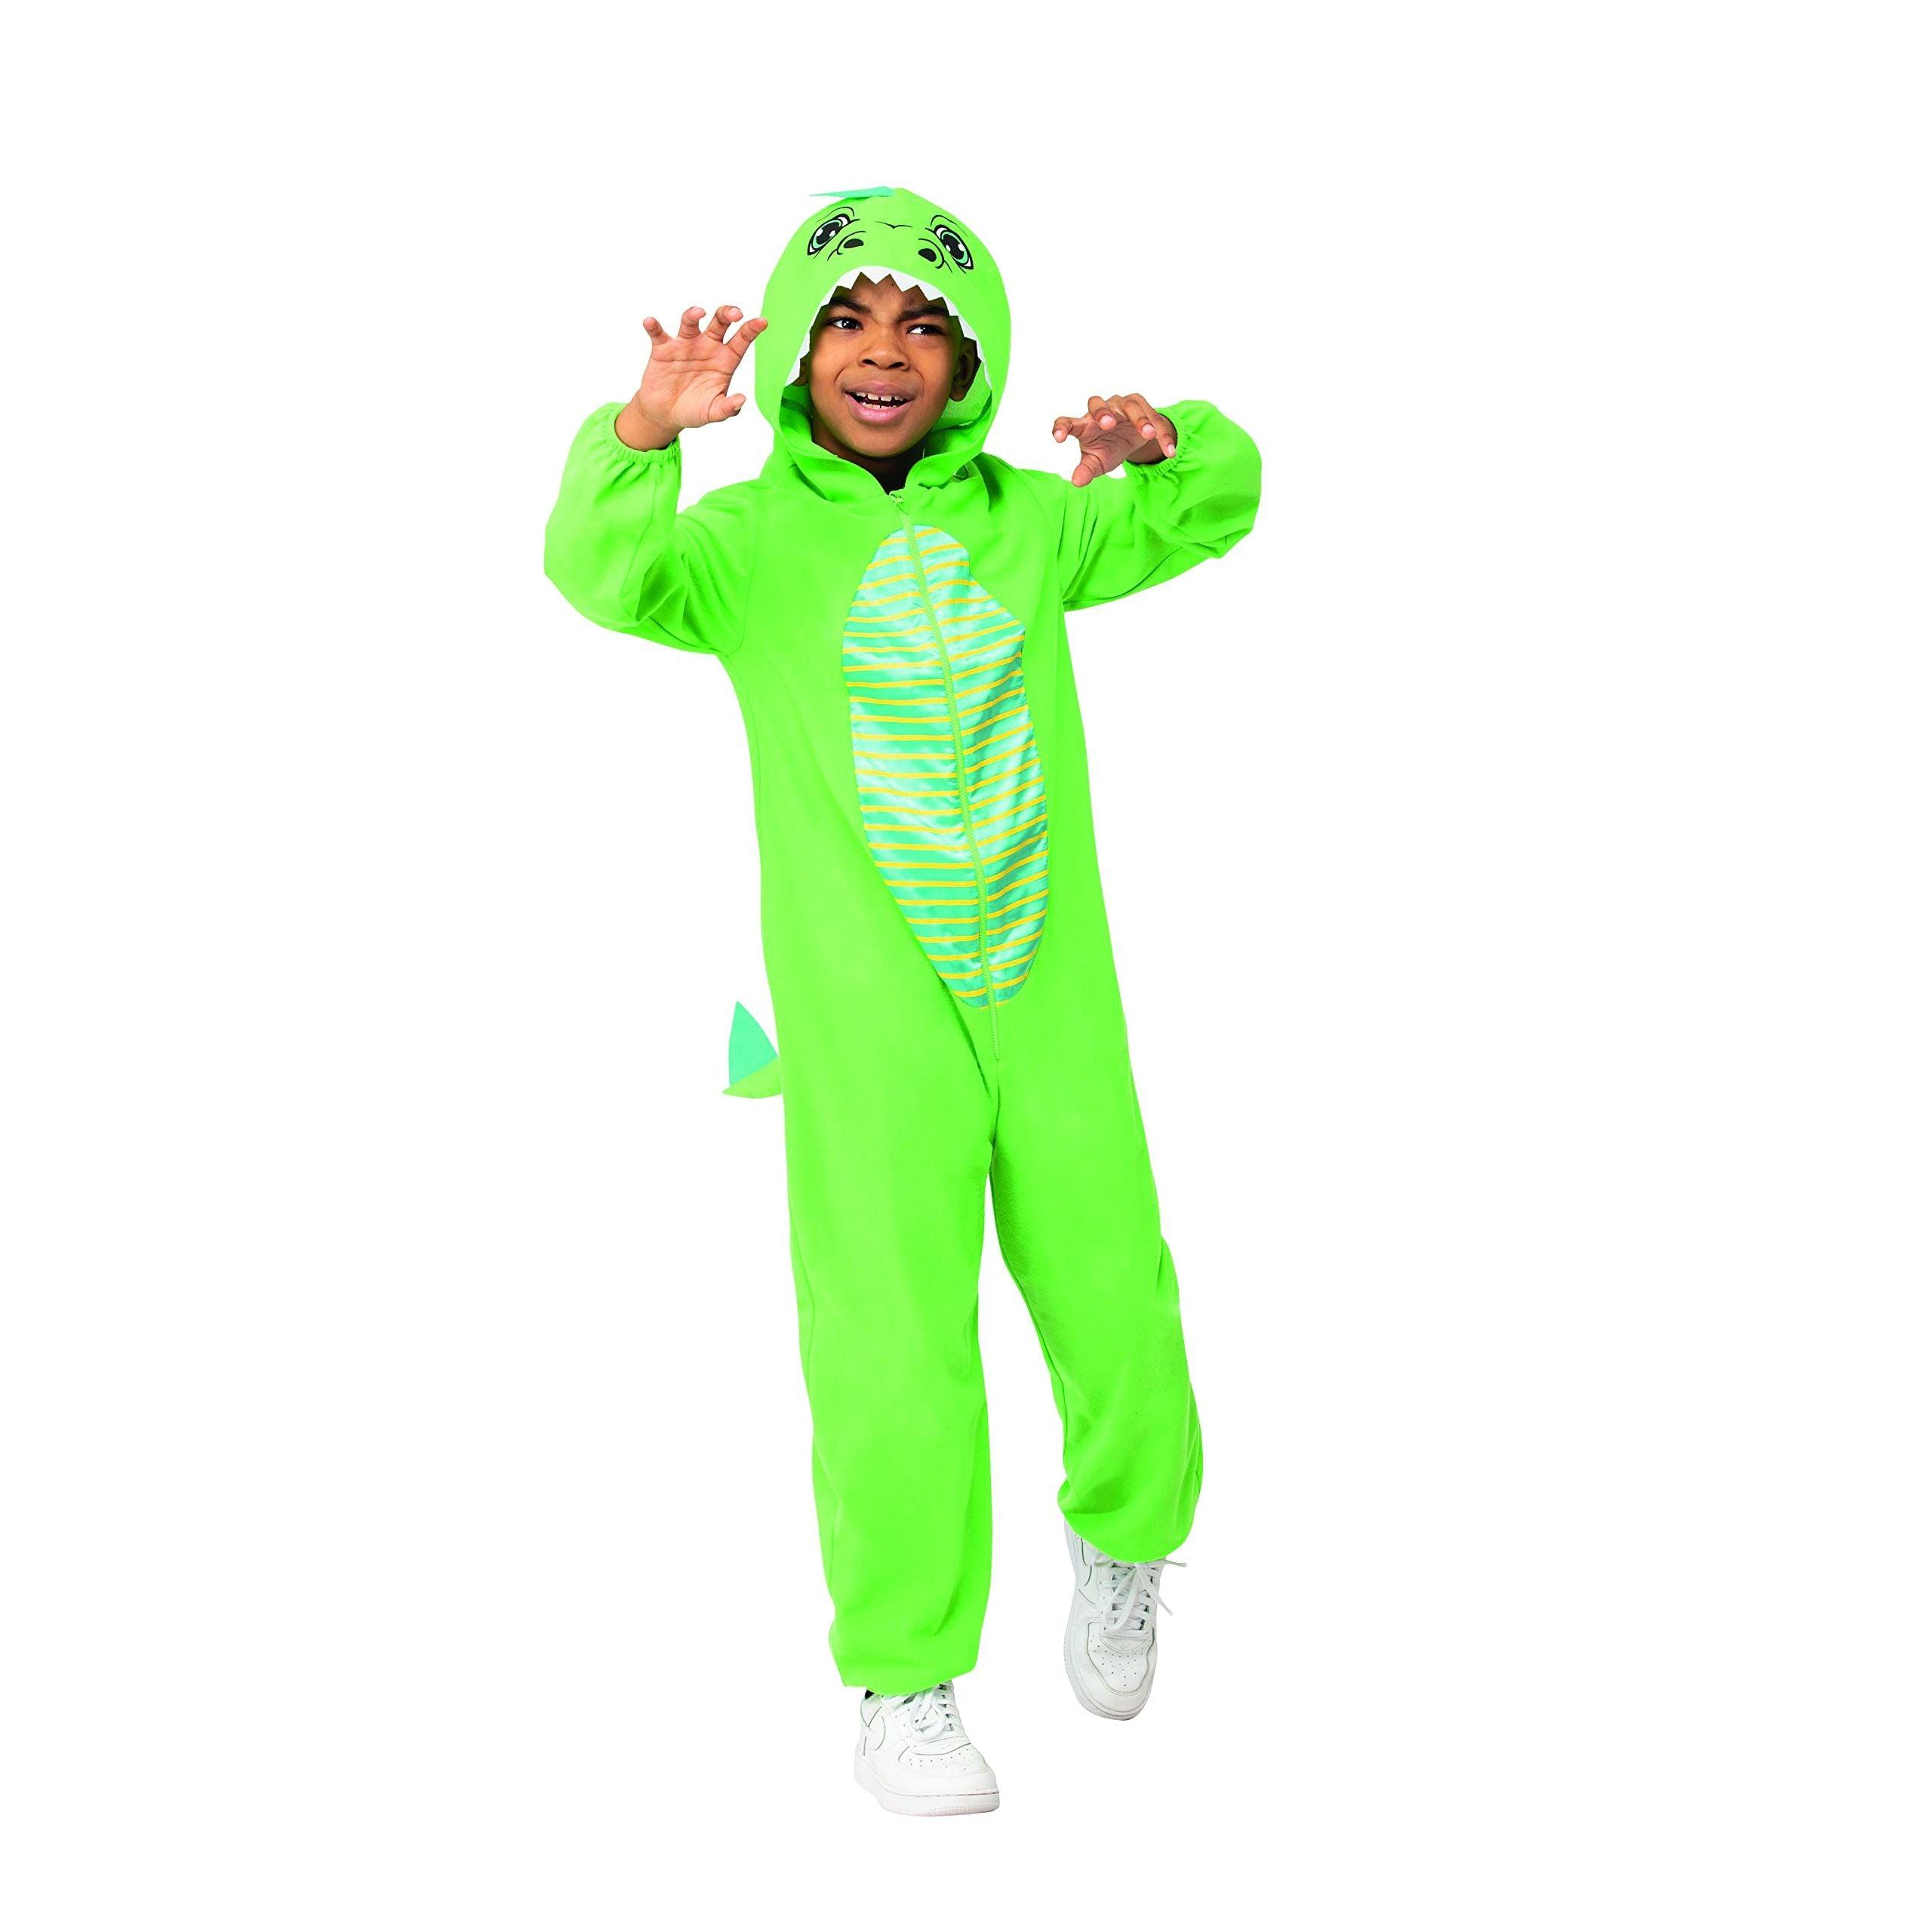 Costume & Party Kids Childs Dinosaur Costume Green (Age 4-6) 0